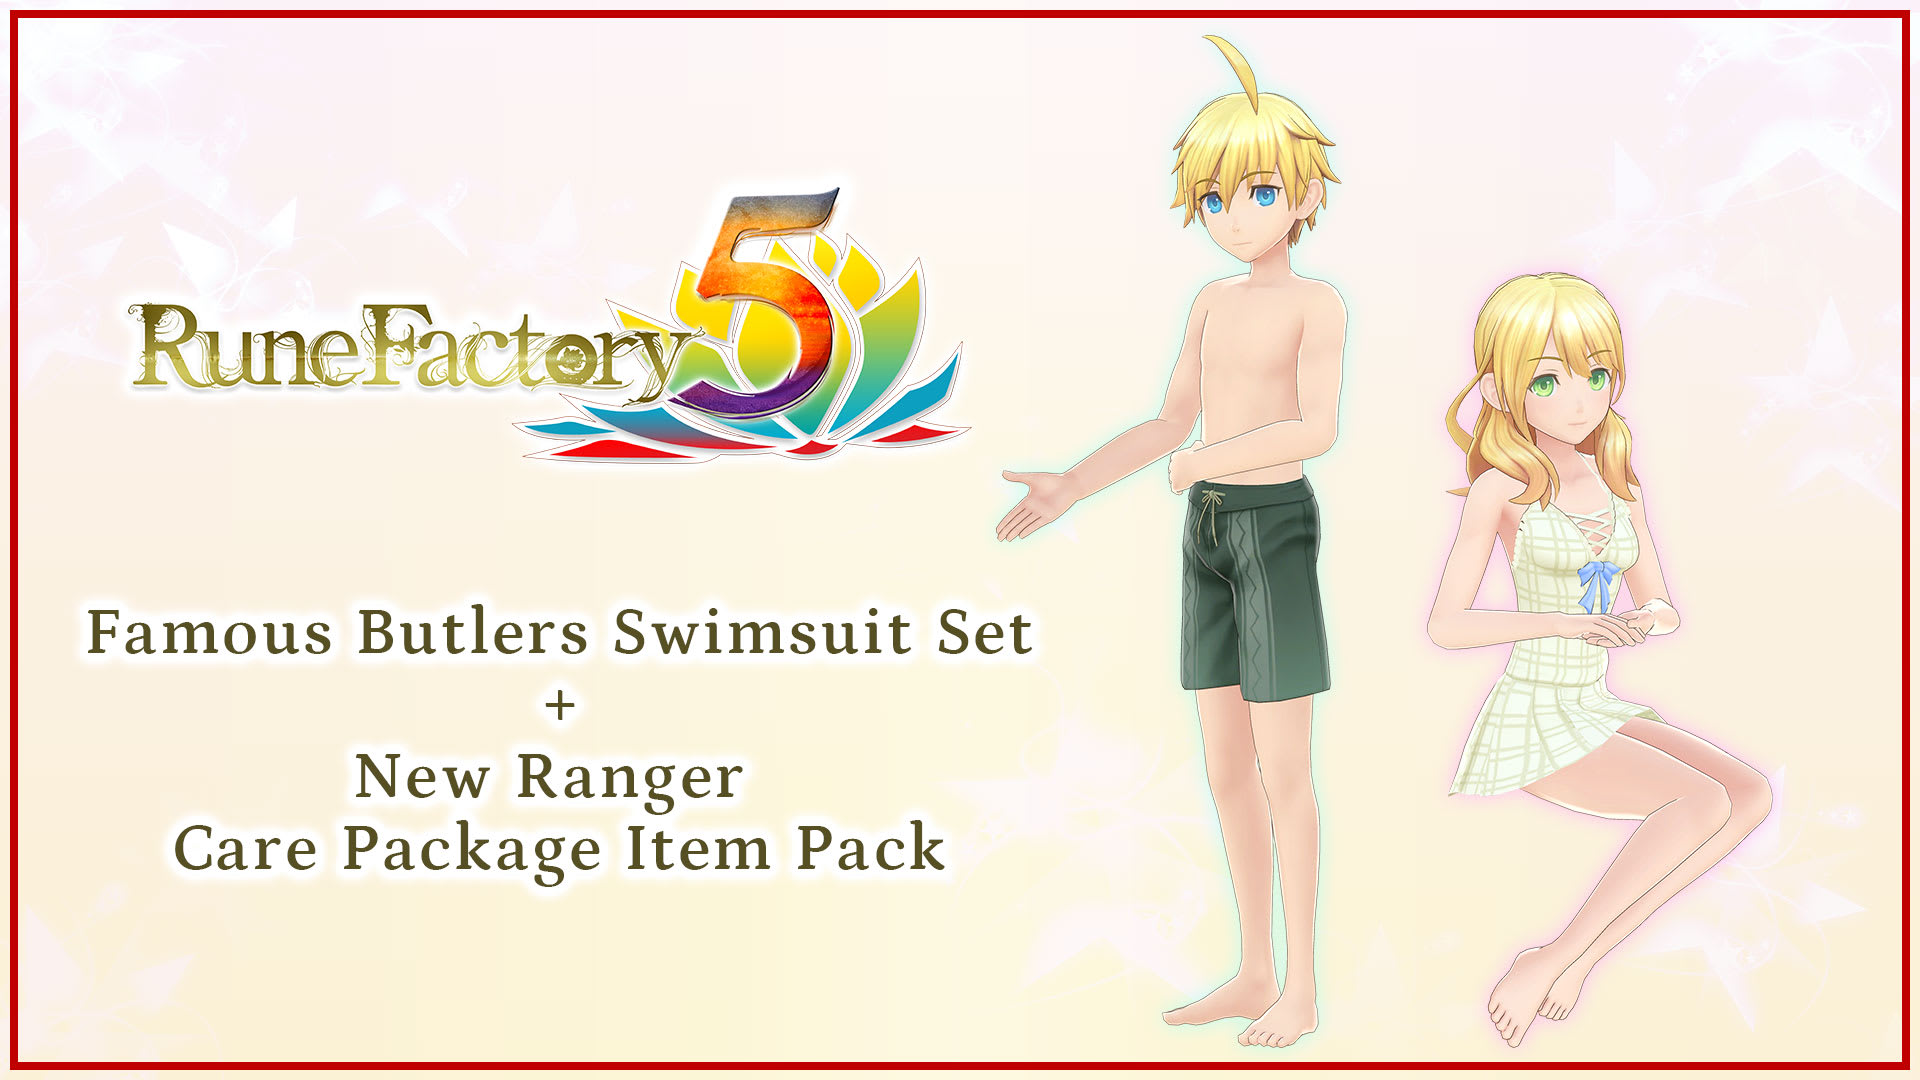 Famous Butlers Swimsuit Set + New Ranger Care Package Item Pack